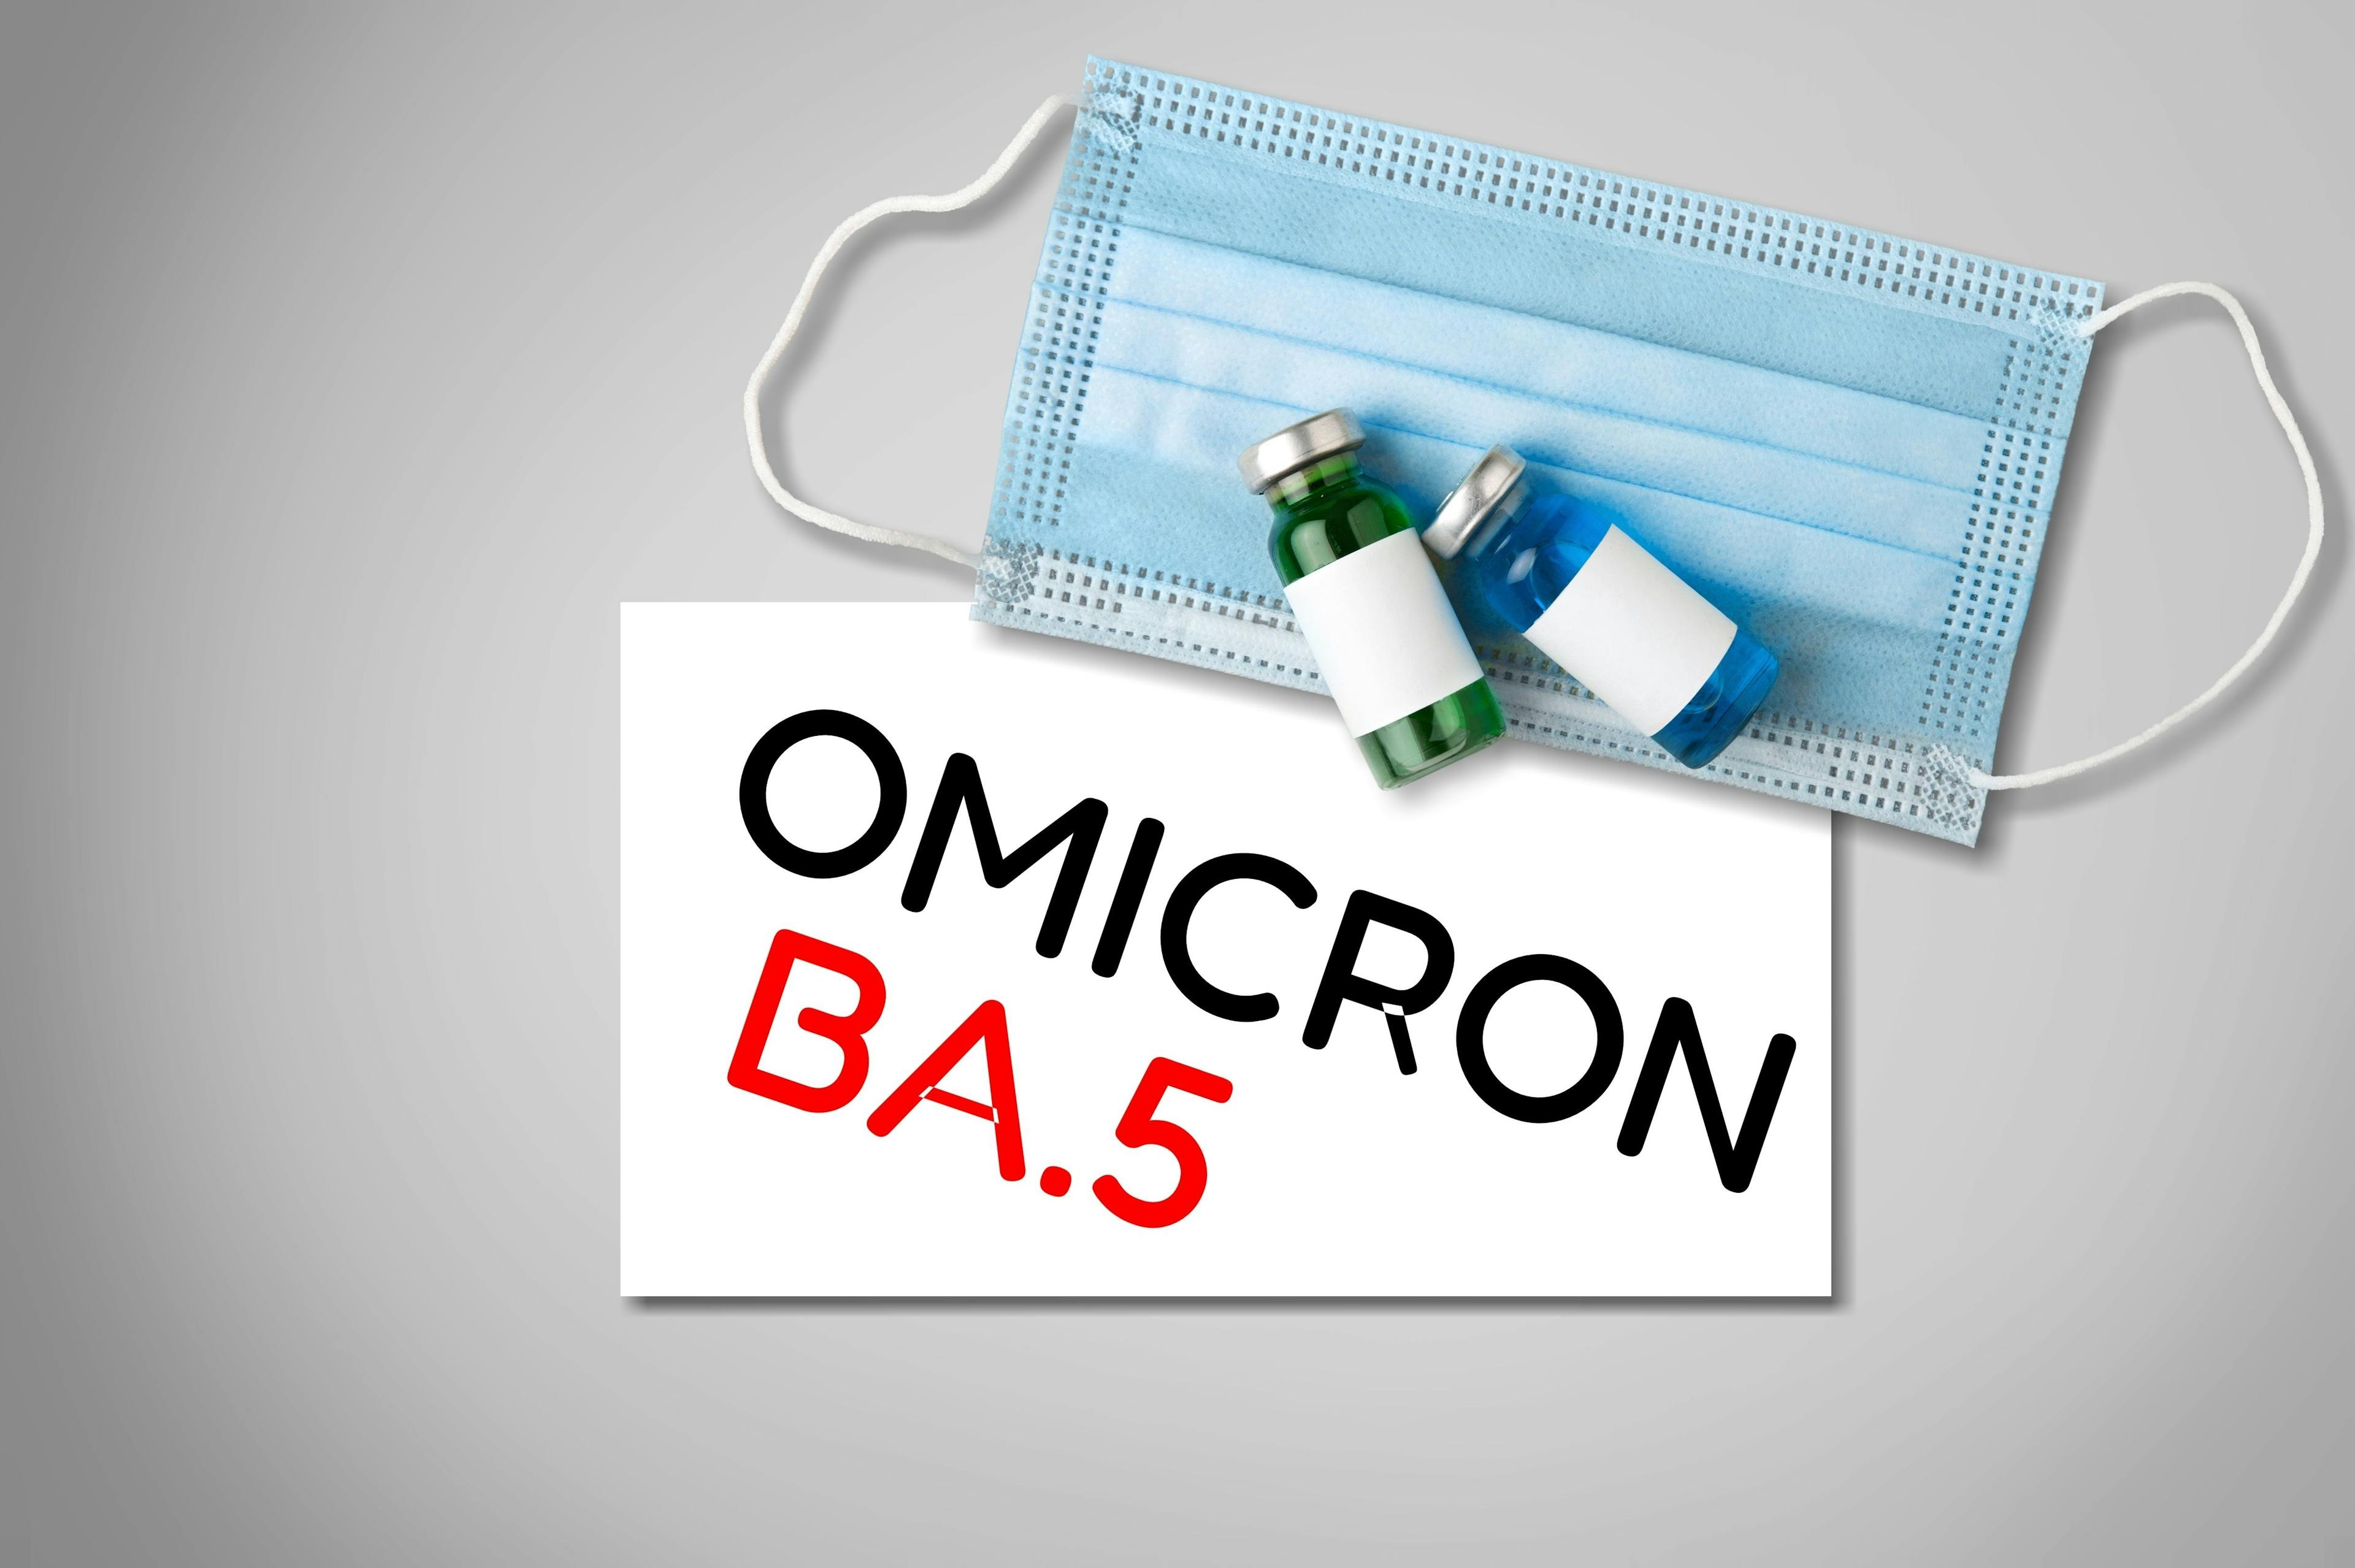 Efficacy of Prior Omicron Infection and Booster Vaccination Against BA.5 Subvariant 